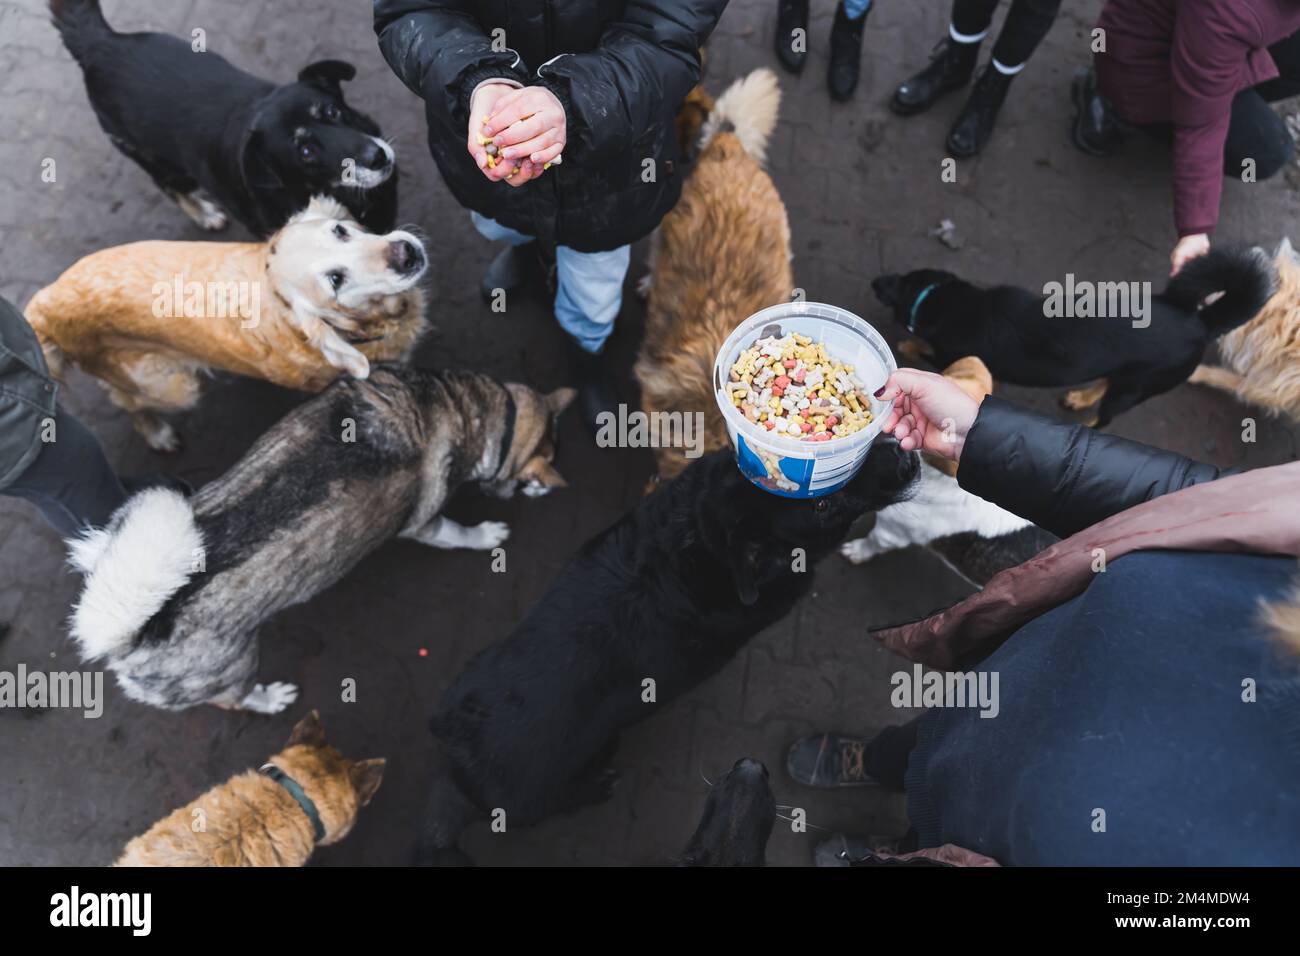 Overhead view of people feeding stray dogs from the animal shelter outdoor. High quality photo Stock Photo